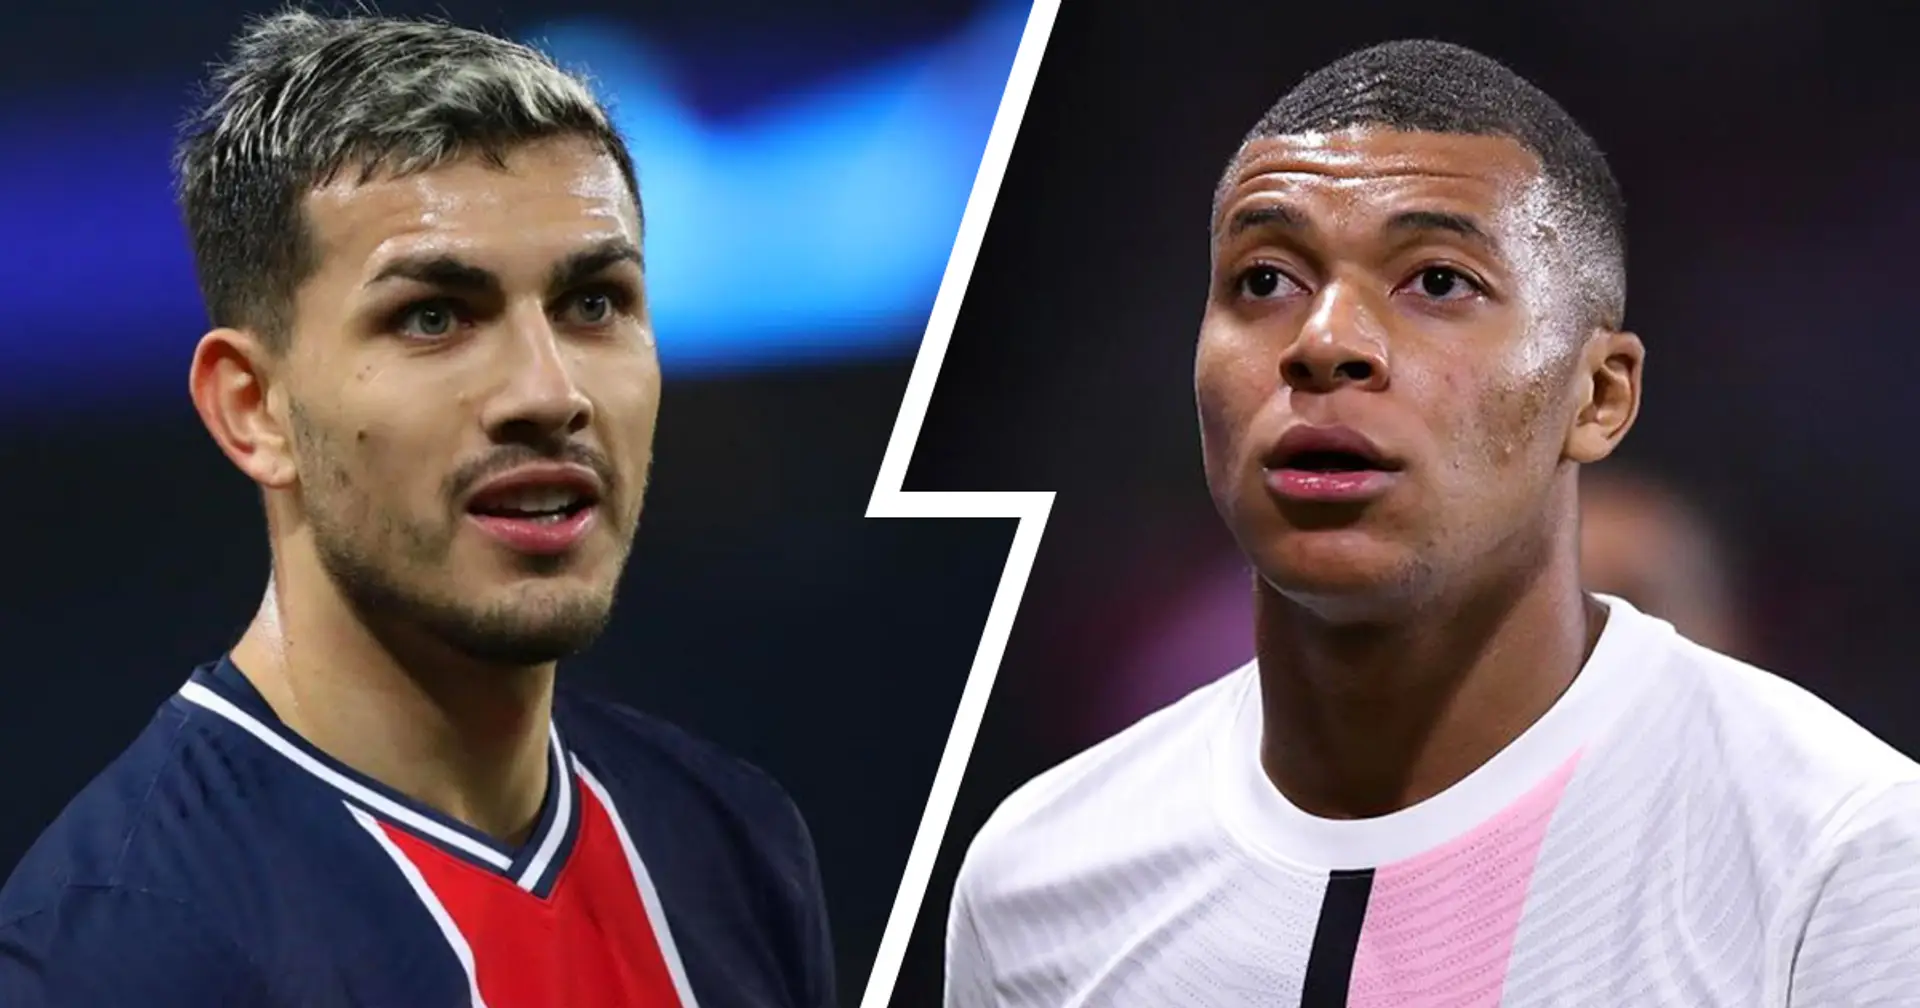 Mbappe reveals truth behind his transfer saga and 2 more big stories you might've missed